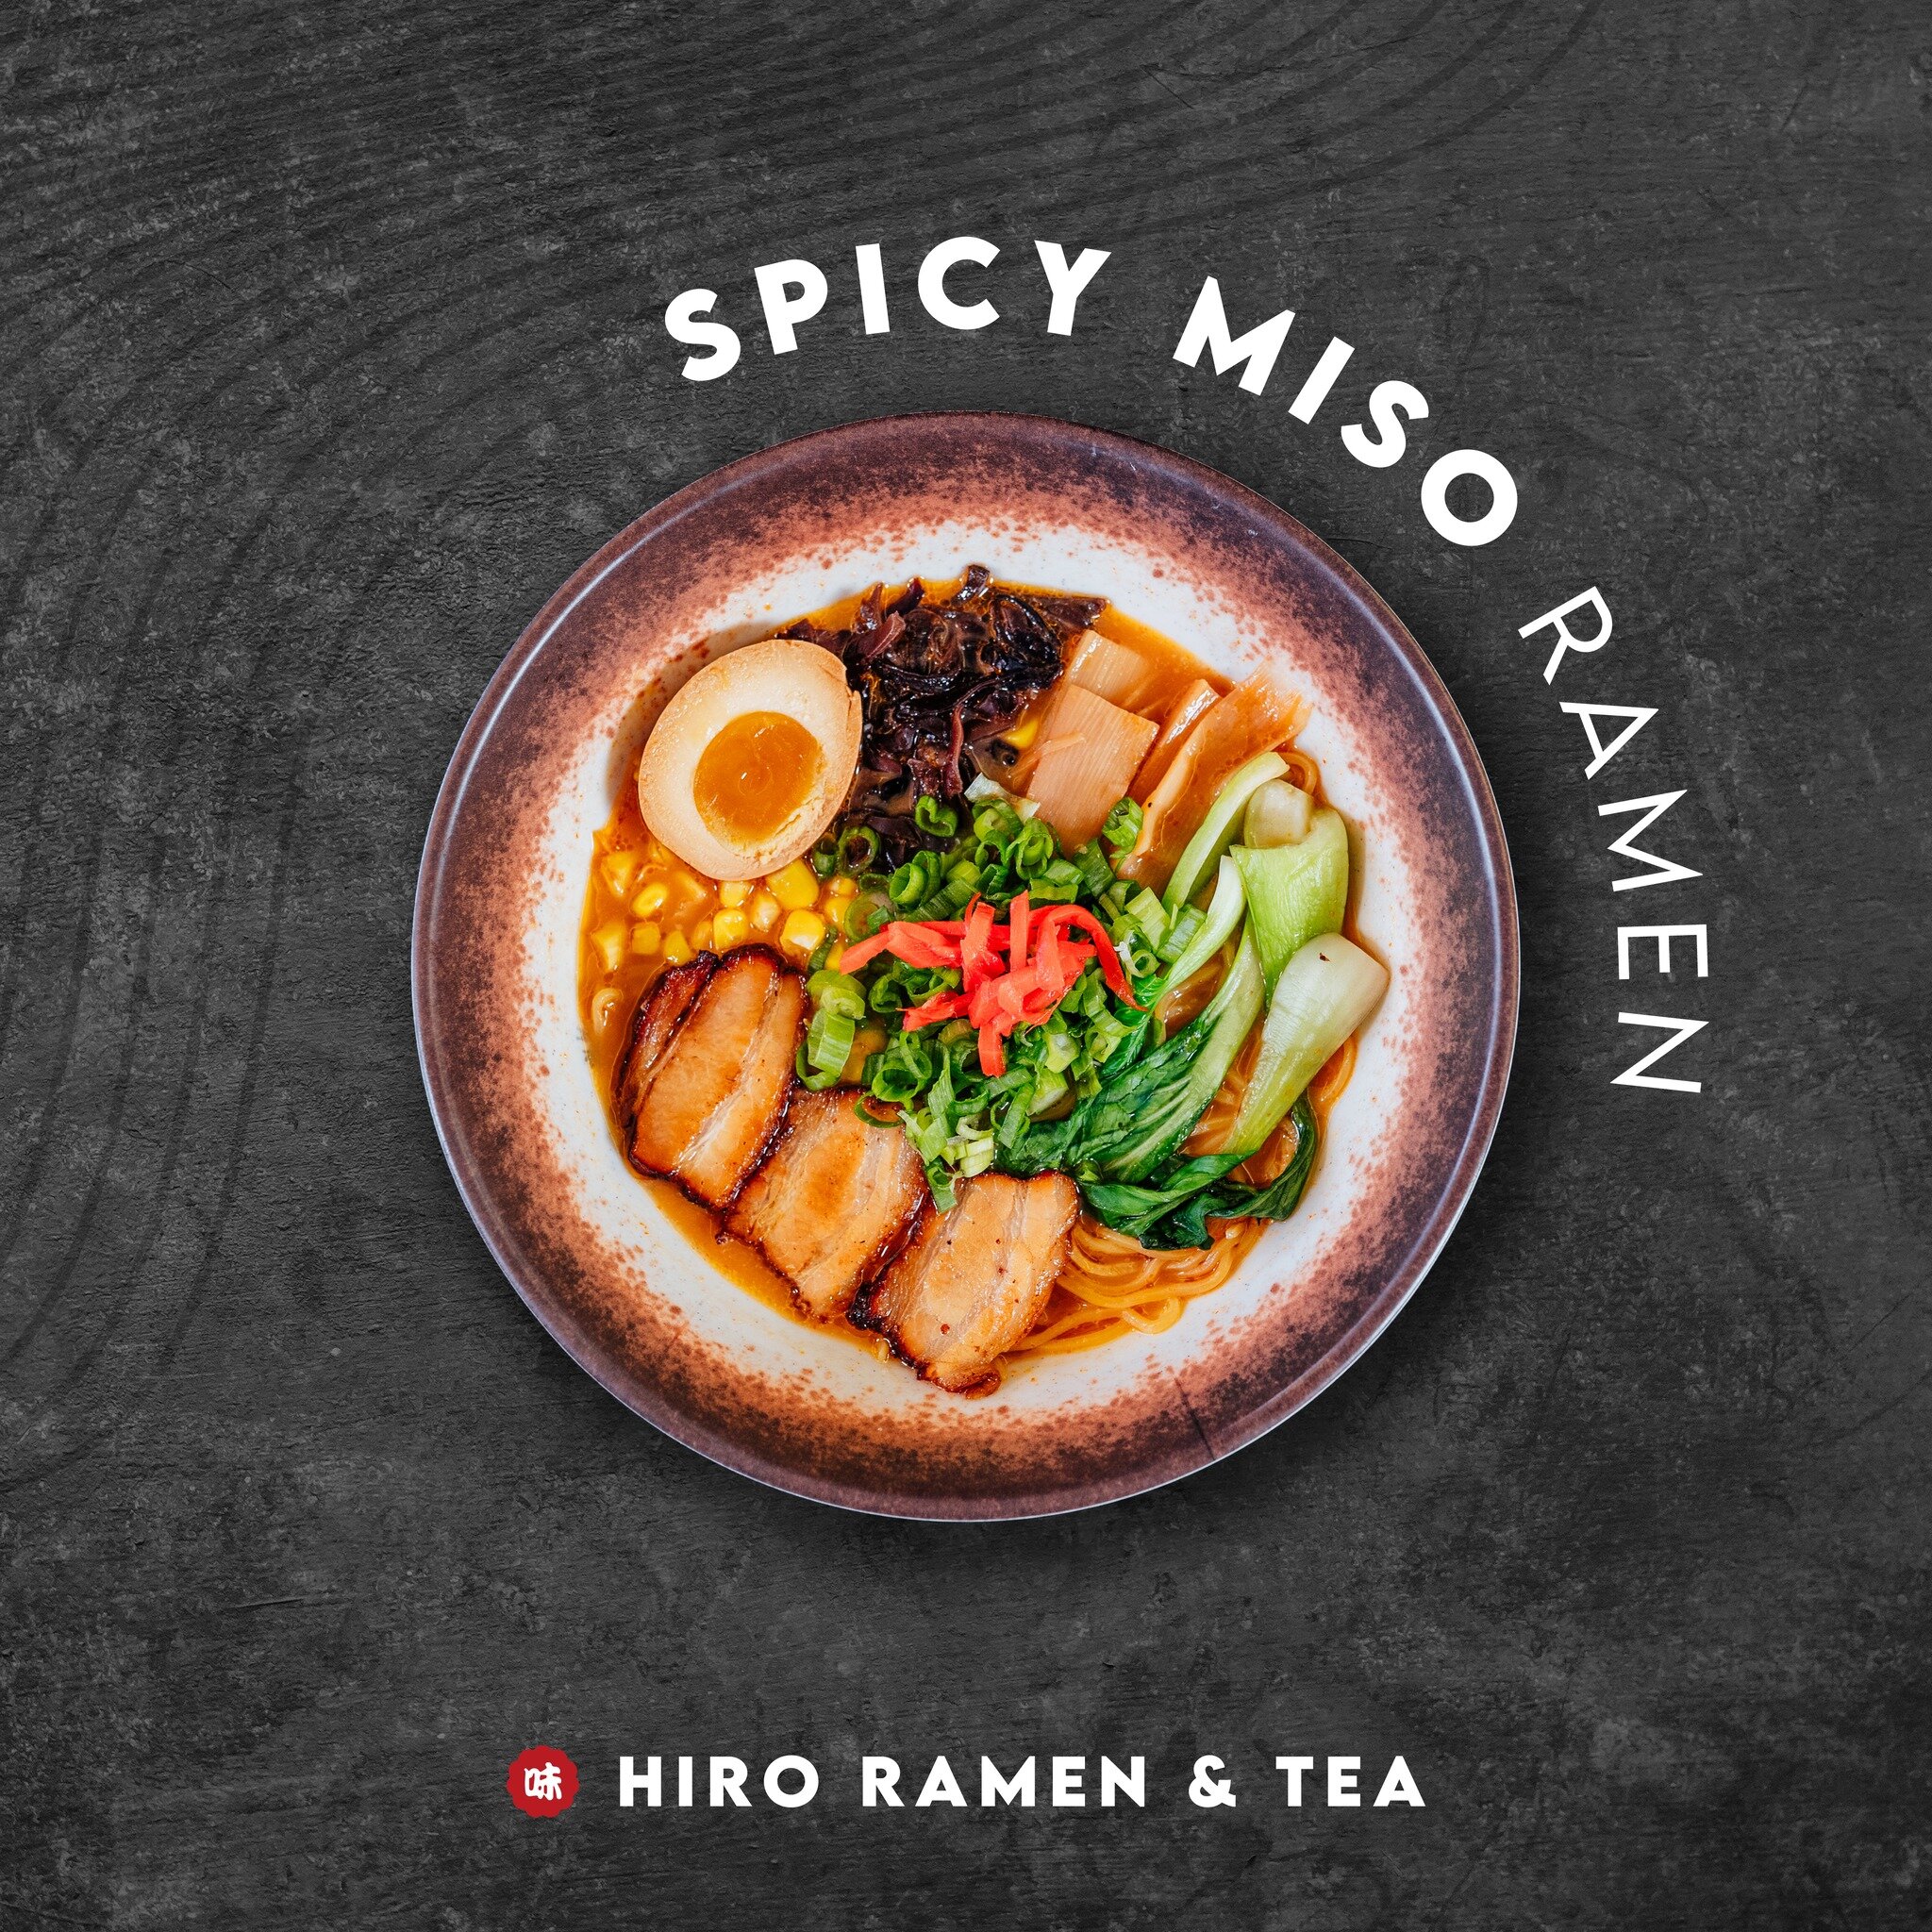 Looking for something spicy for the weekend? Try out our Spicy Miso Ramen: a twist on the traditional miso broth with chili oil and garlic!

#columbusohio #asseenincolumbus #ramen #cravecbus #614 #614eats #614columbus #ohiostate #columbusfoodscene #c